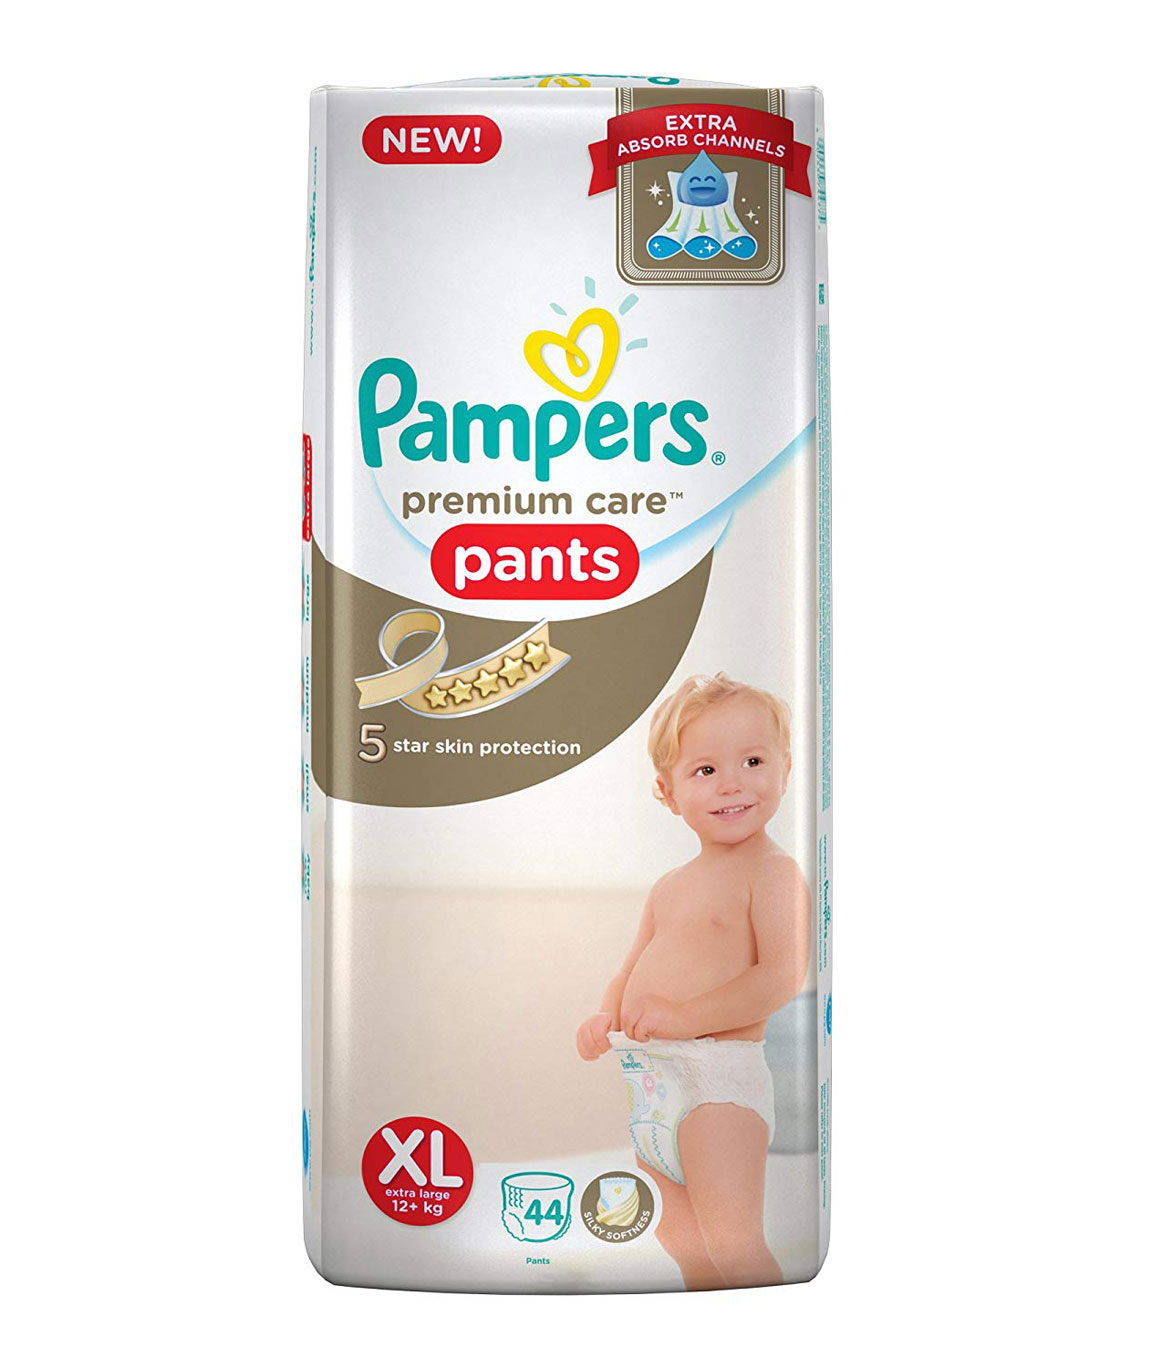 Pampers Premium Care Pants with Aloe Vera  CottonLike Softness  Size XL  Buy packet of 24 diapers at best price in India  1mg